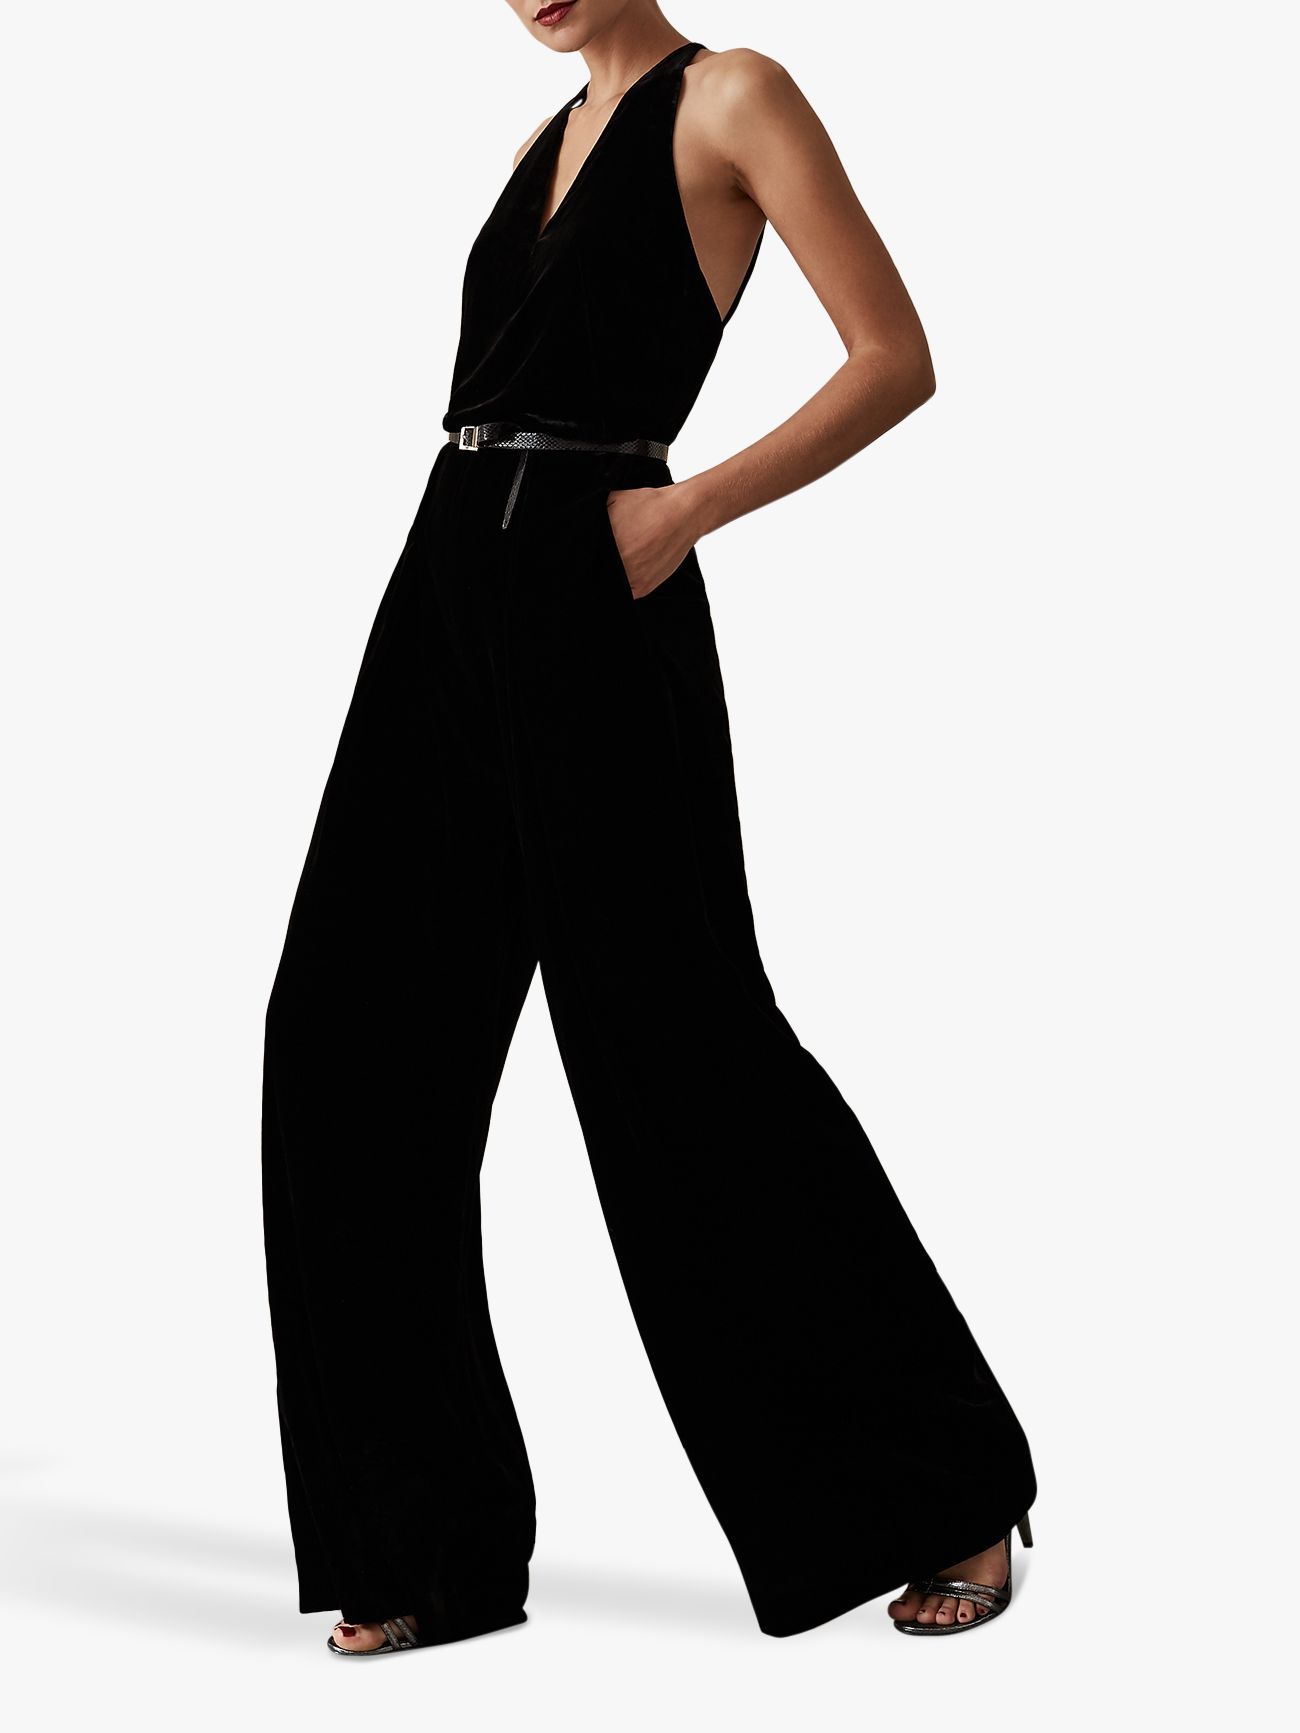 cute jumpsuits with sleeves